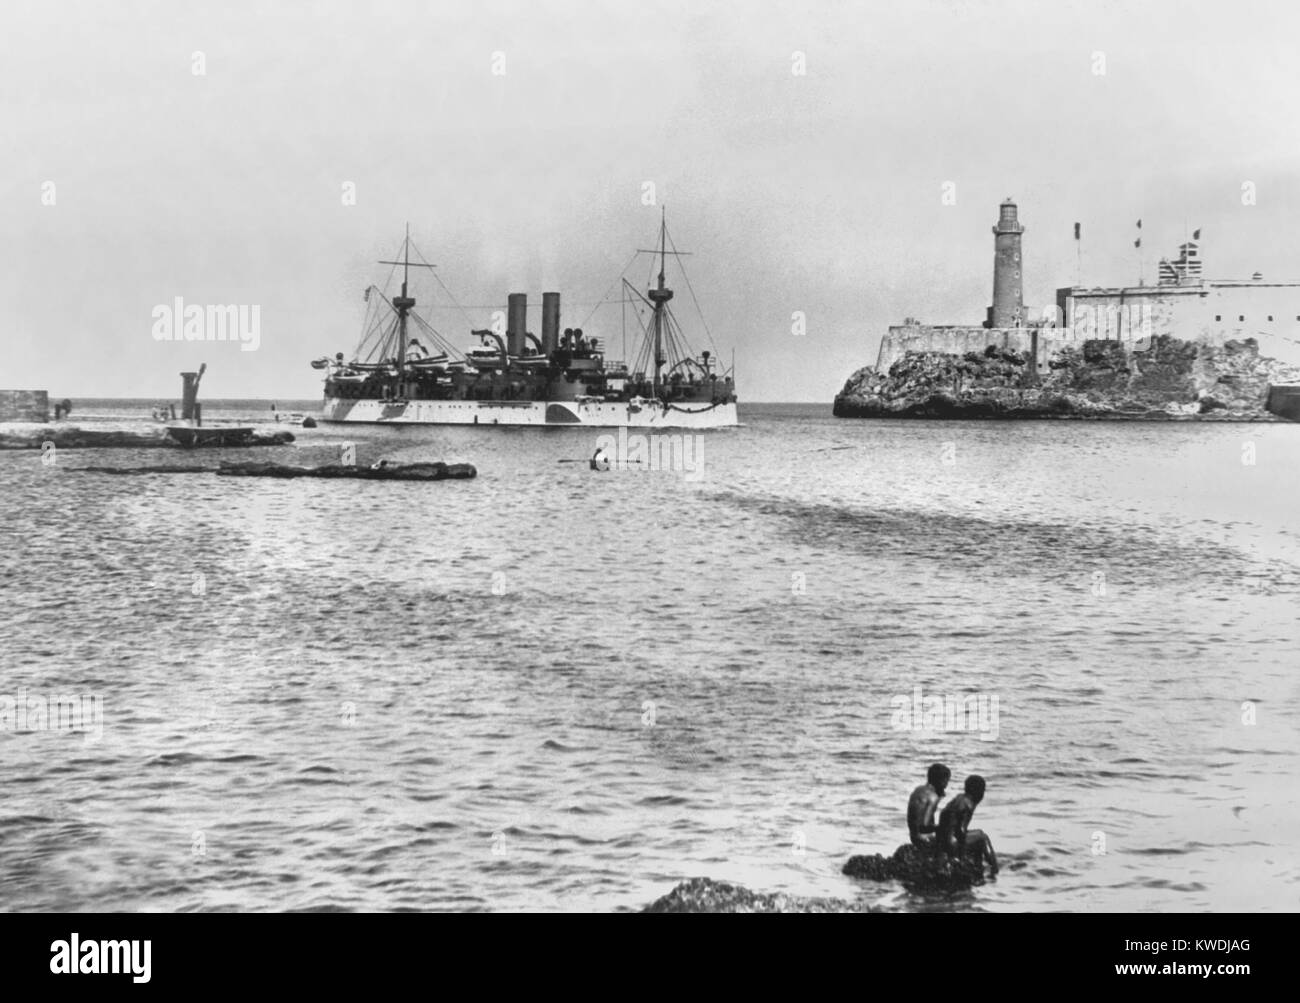 USS MAINE entering Havana Harbor in January 1898. She was sent to protect U.S. interests during the Cuban revolt against Spain. At right is the old Morro Castle fortress (BSLOC 2017 10 11) Stock Photo